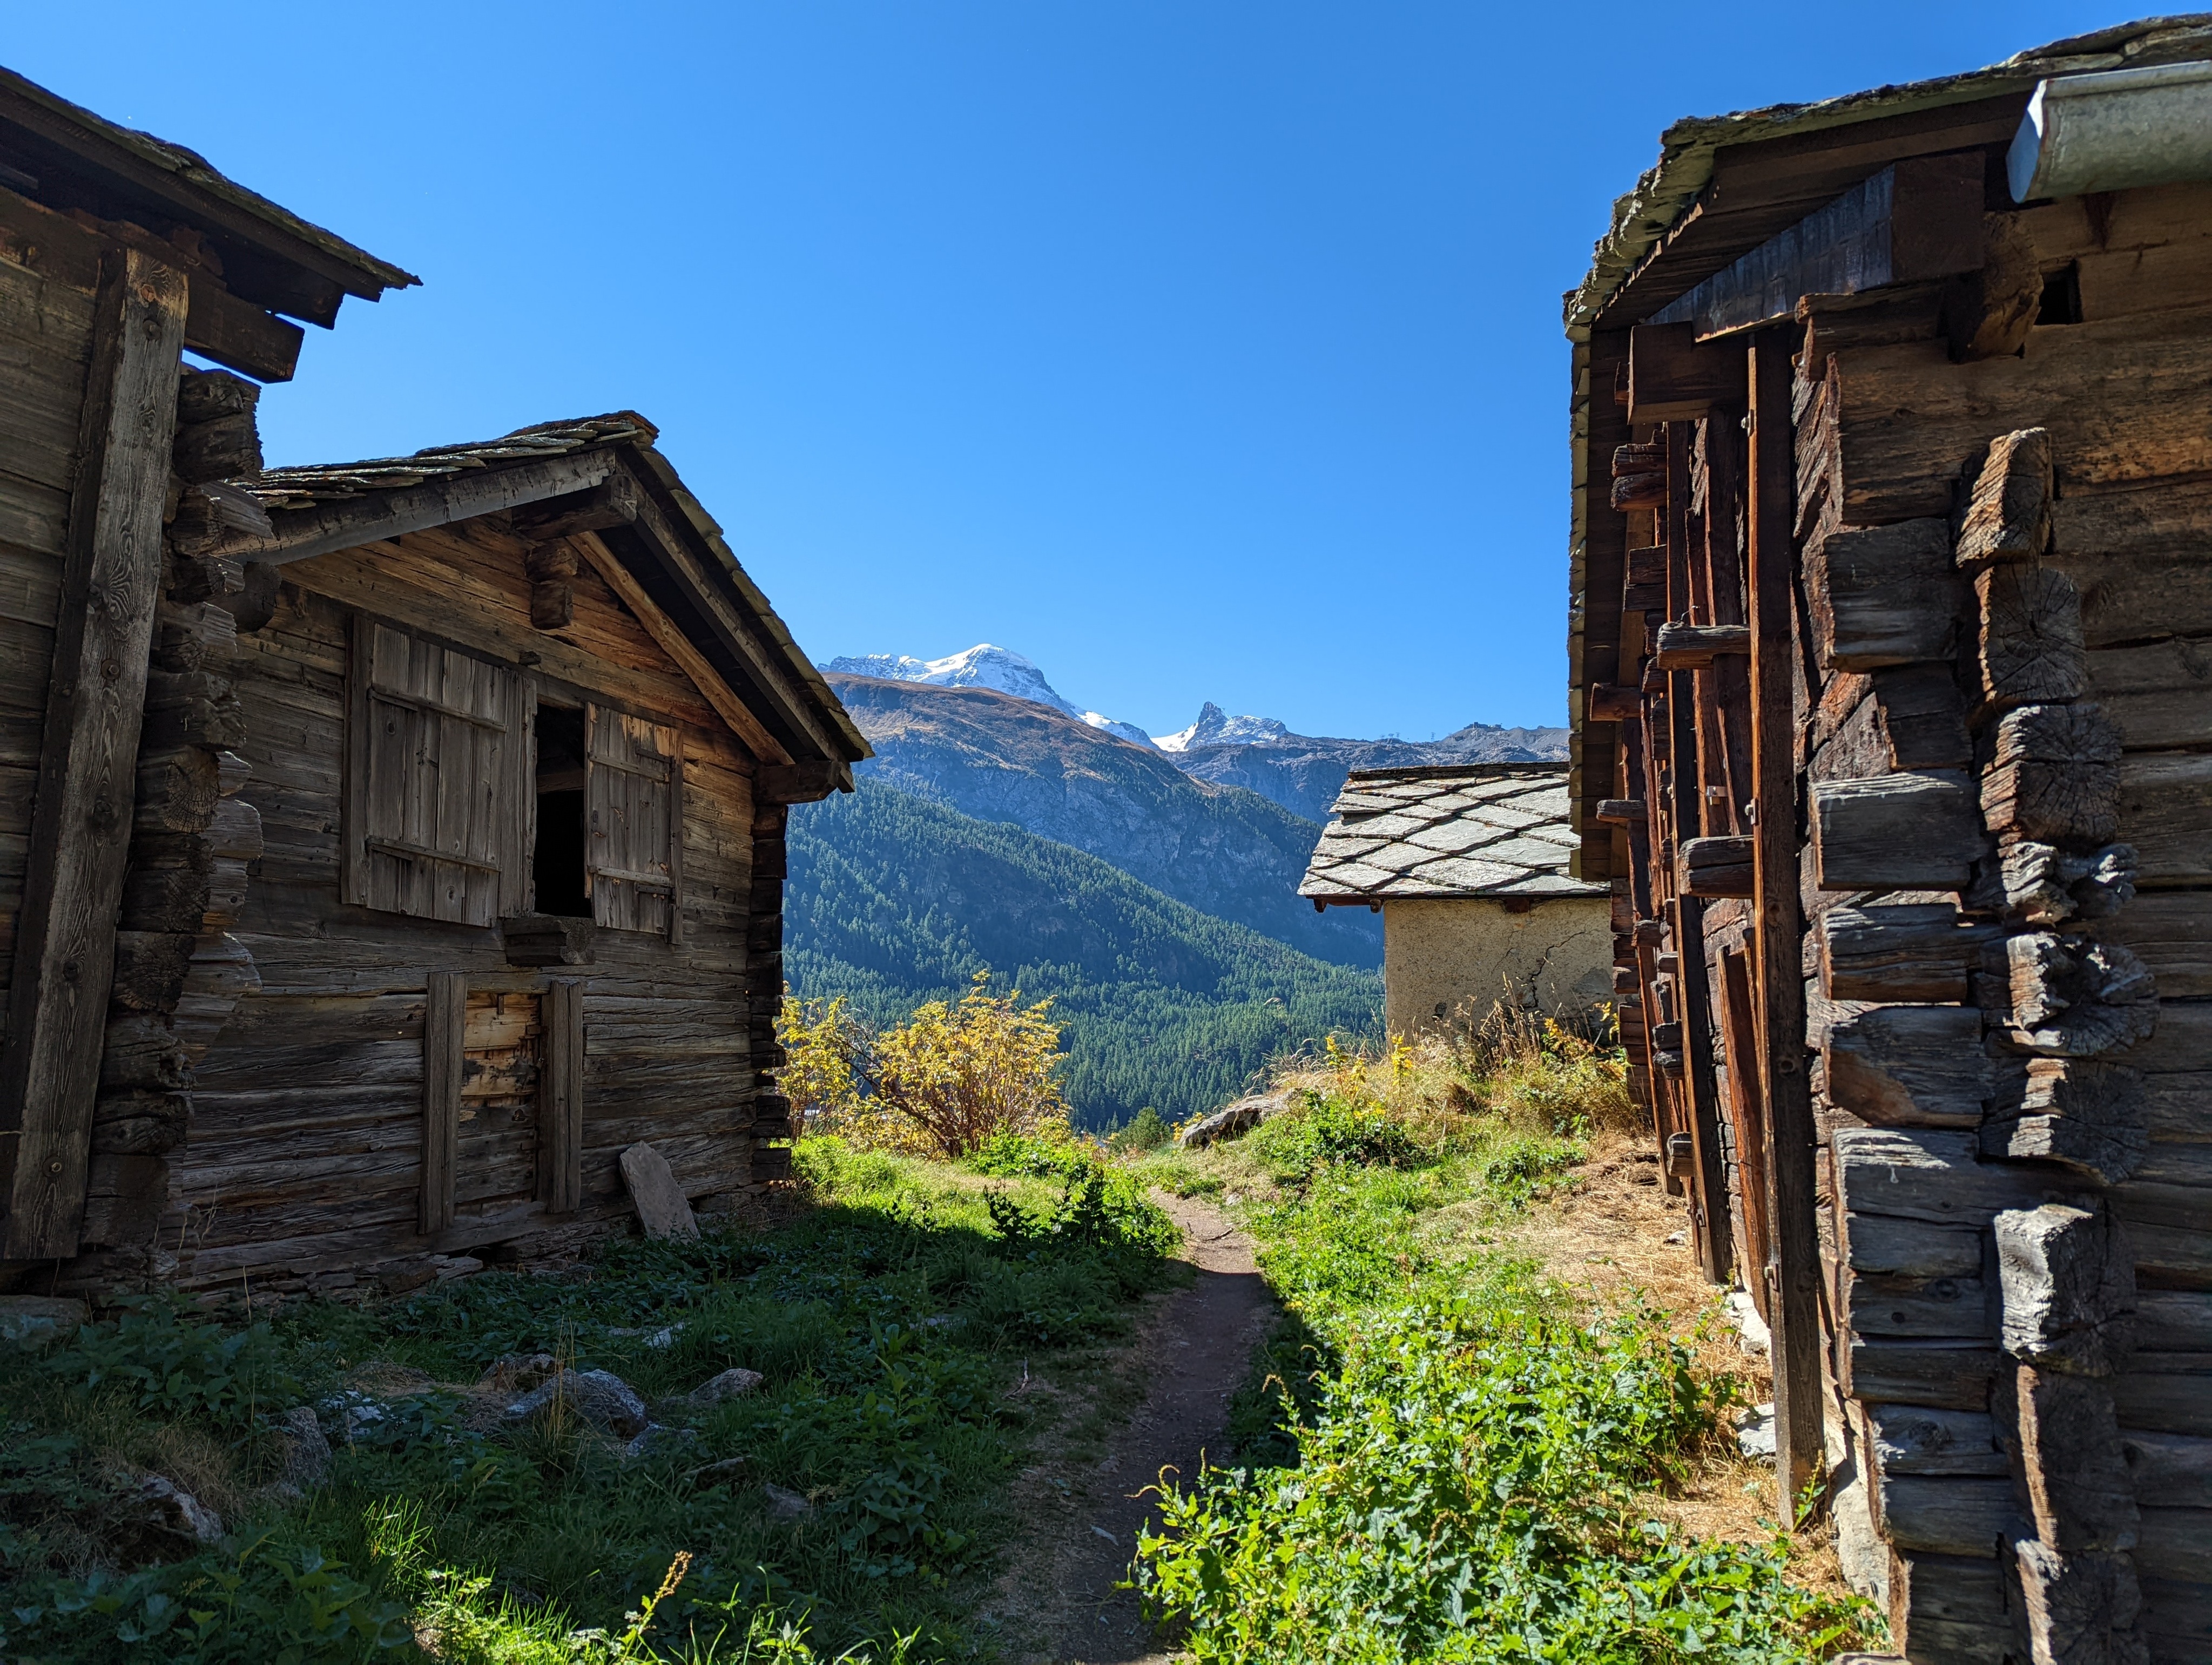 Huts above Zermatt with Monte Rosa peaking out over Sunnegga